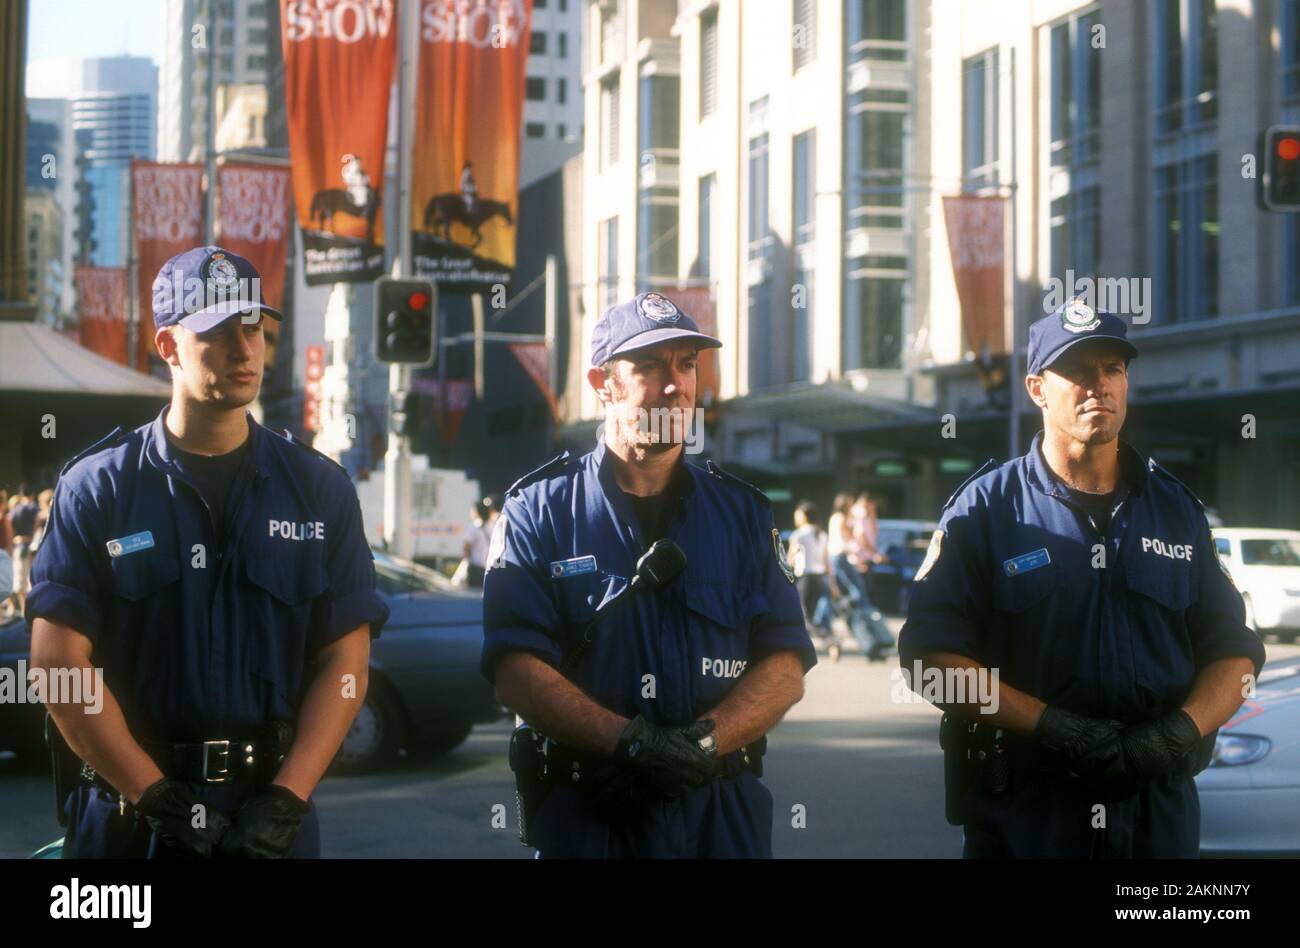 POLICE ON STANDBY DURING A PROTEST THROUGH THE STREETS OF SYDNEY, NEW SOUTH WALES, AUSTRALIA. Stock Photo